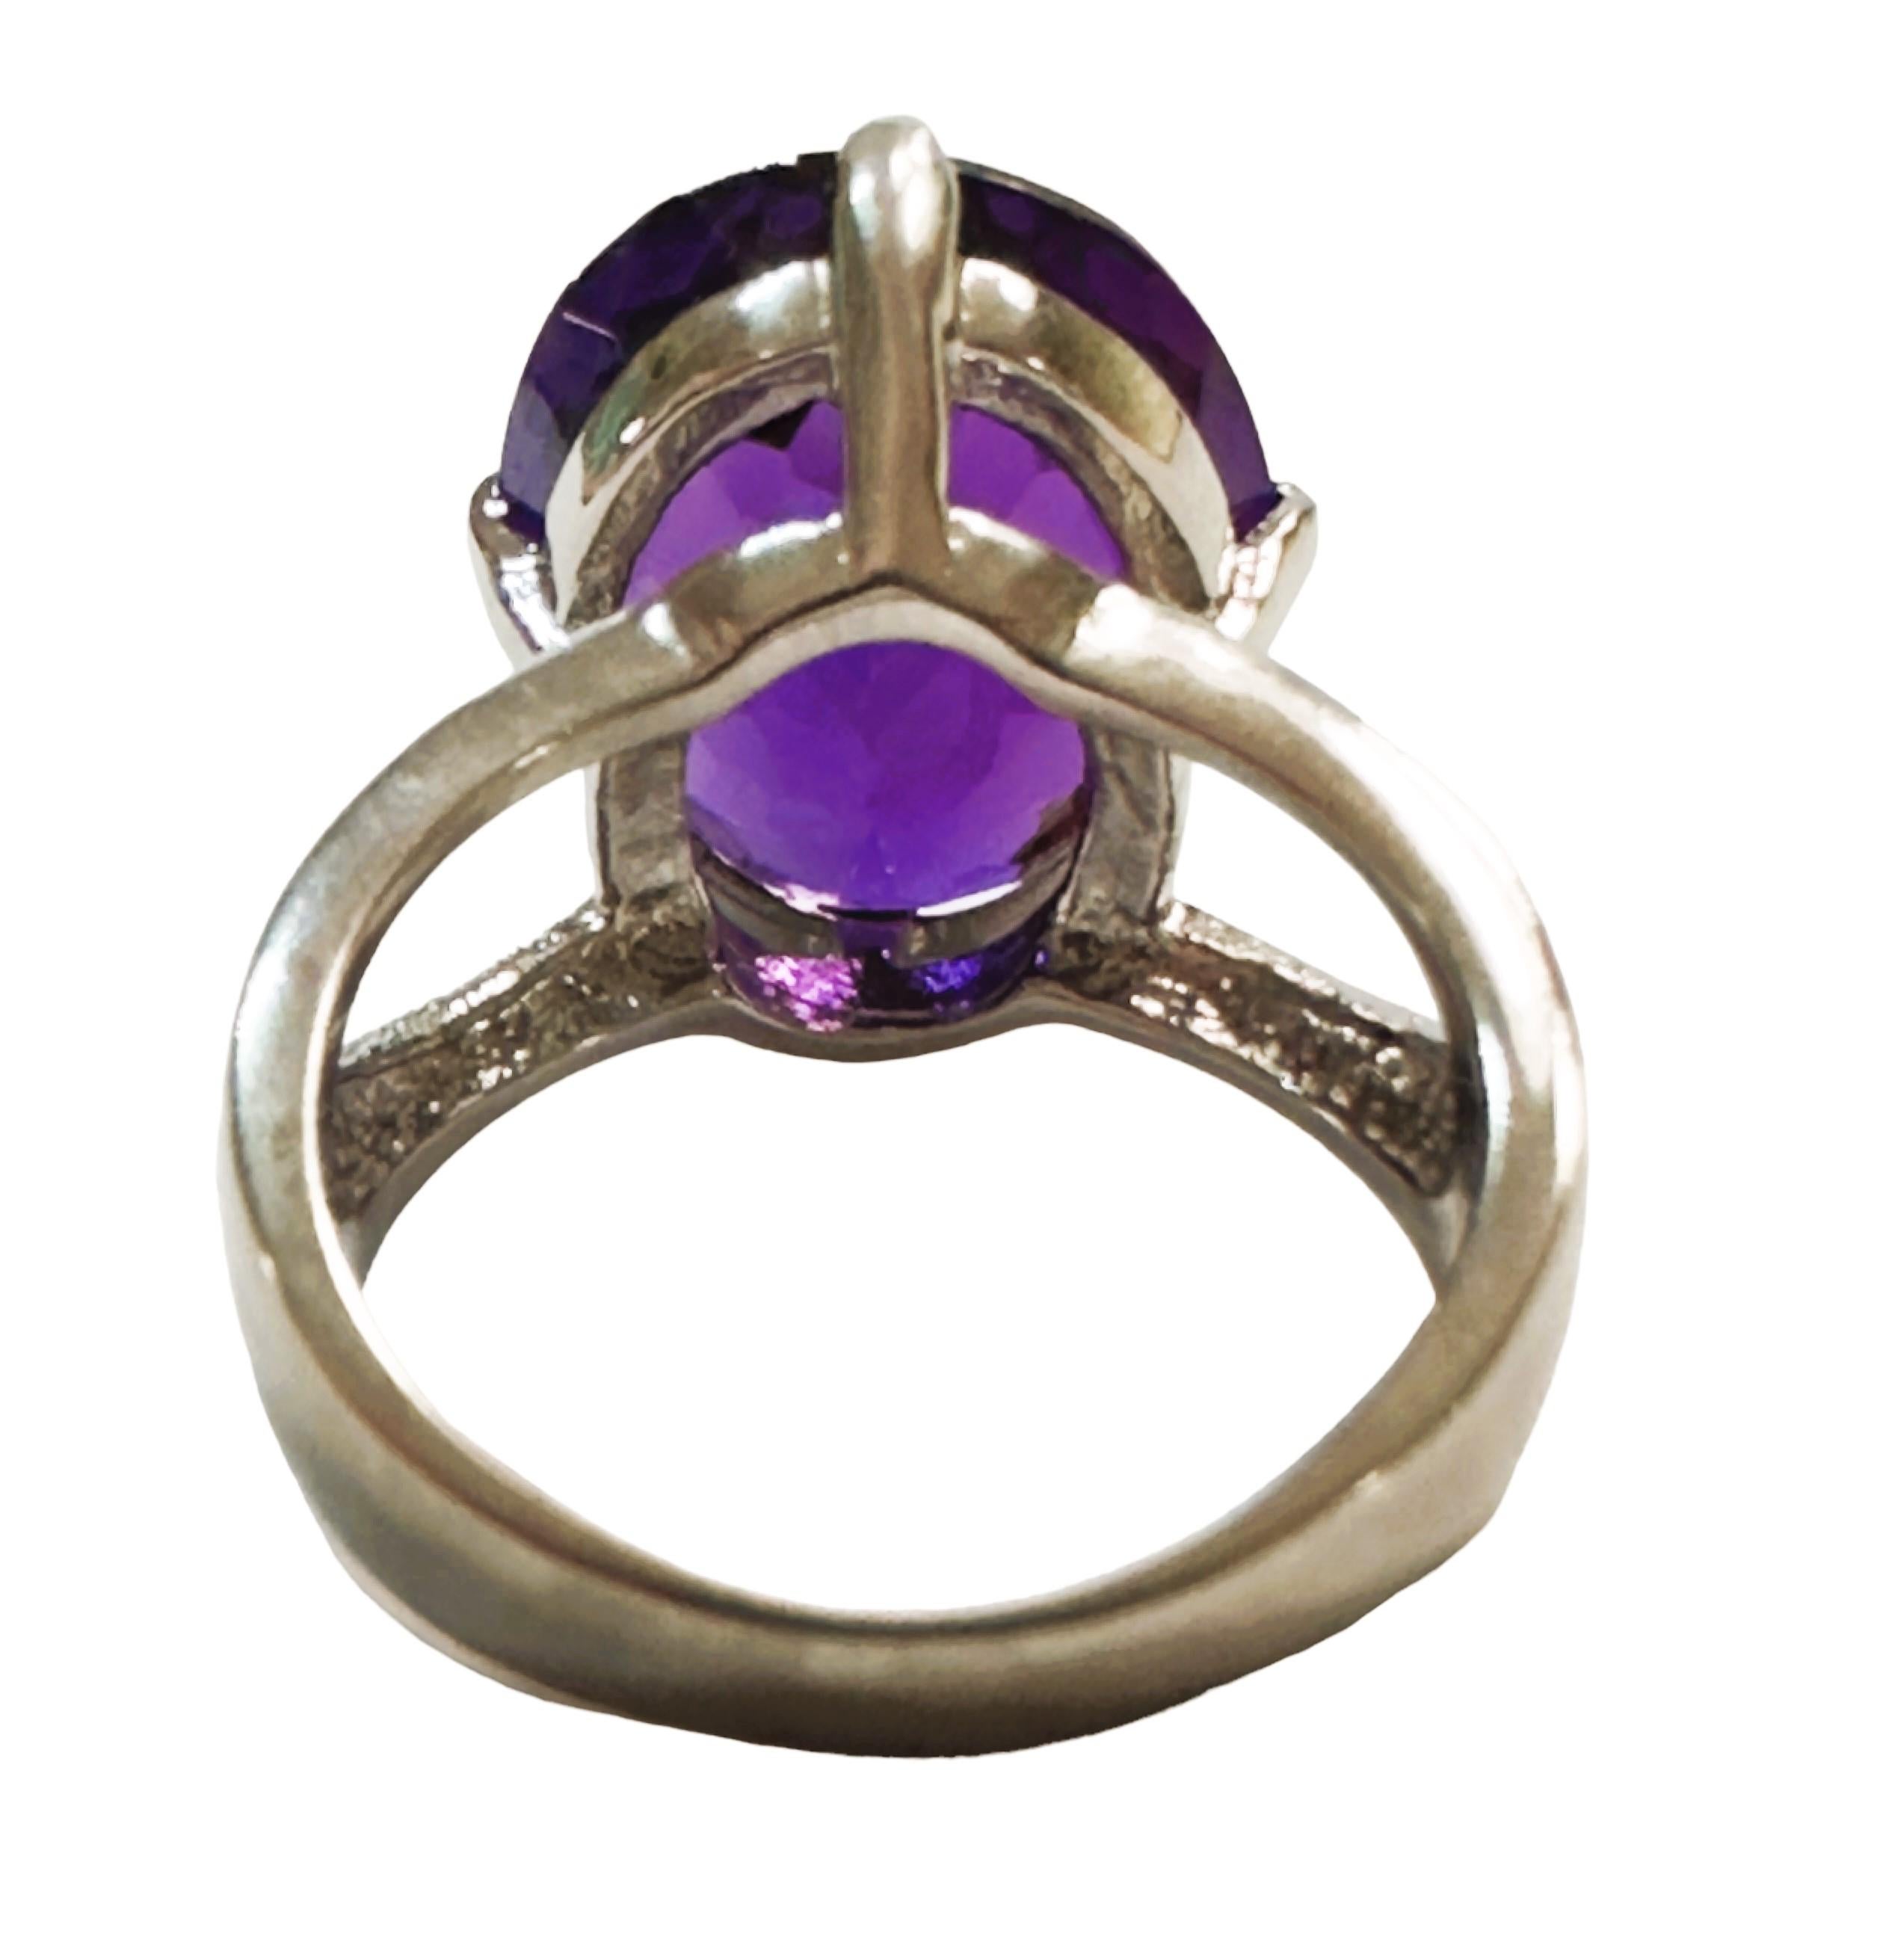 Emerald Cut New African 11.80 Ct Purple Amethyst Sterling Ring Size 6.25 For Sale